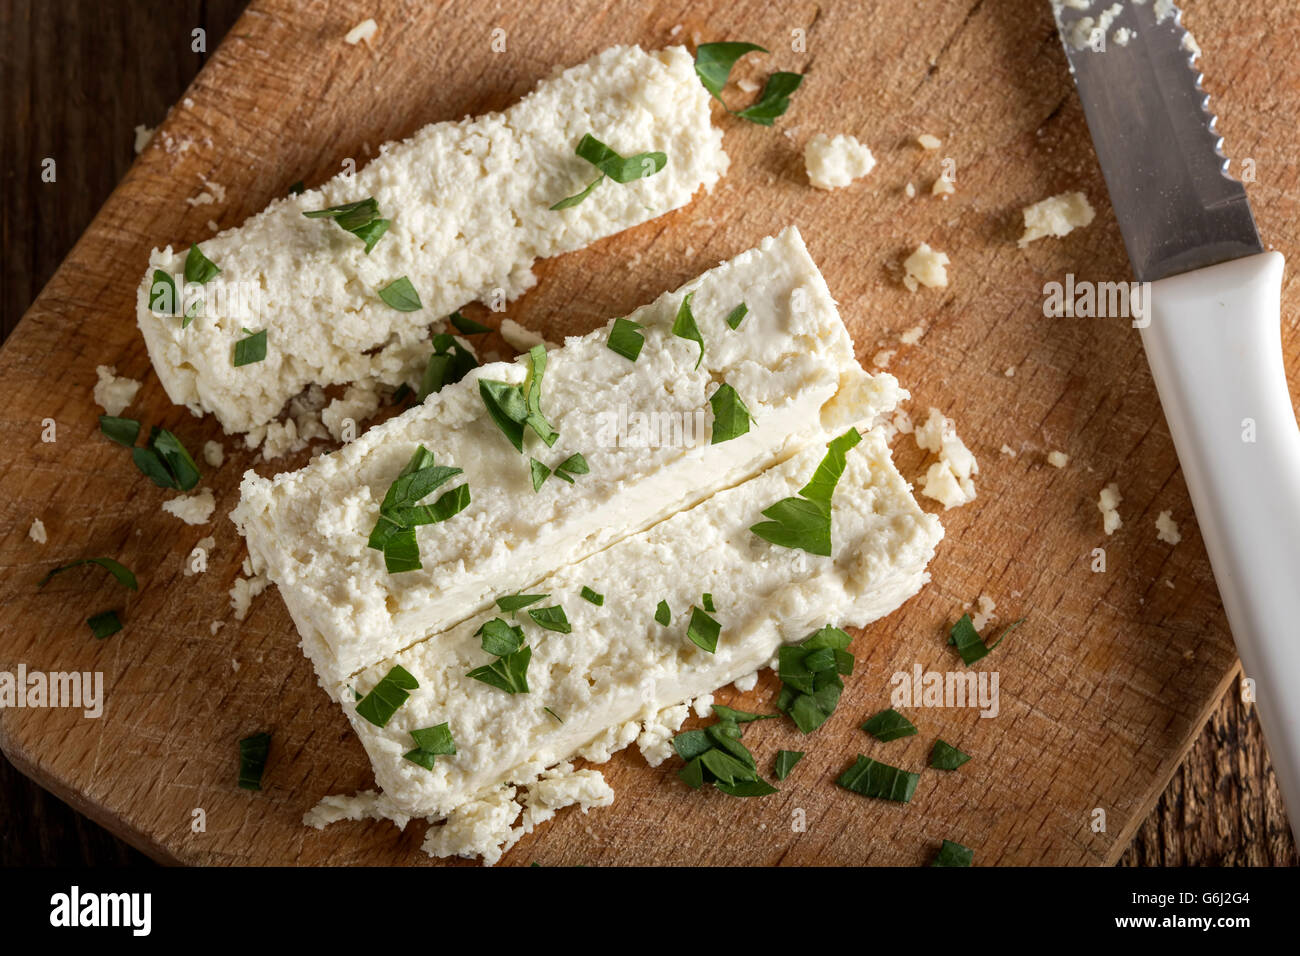 Fresh cheese slices on a wooden background with parsley Stock Photo